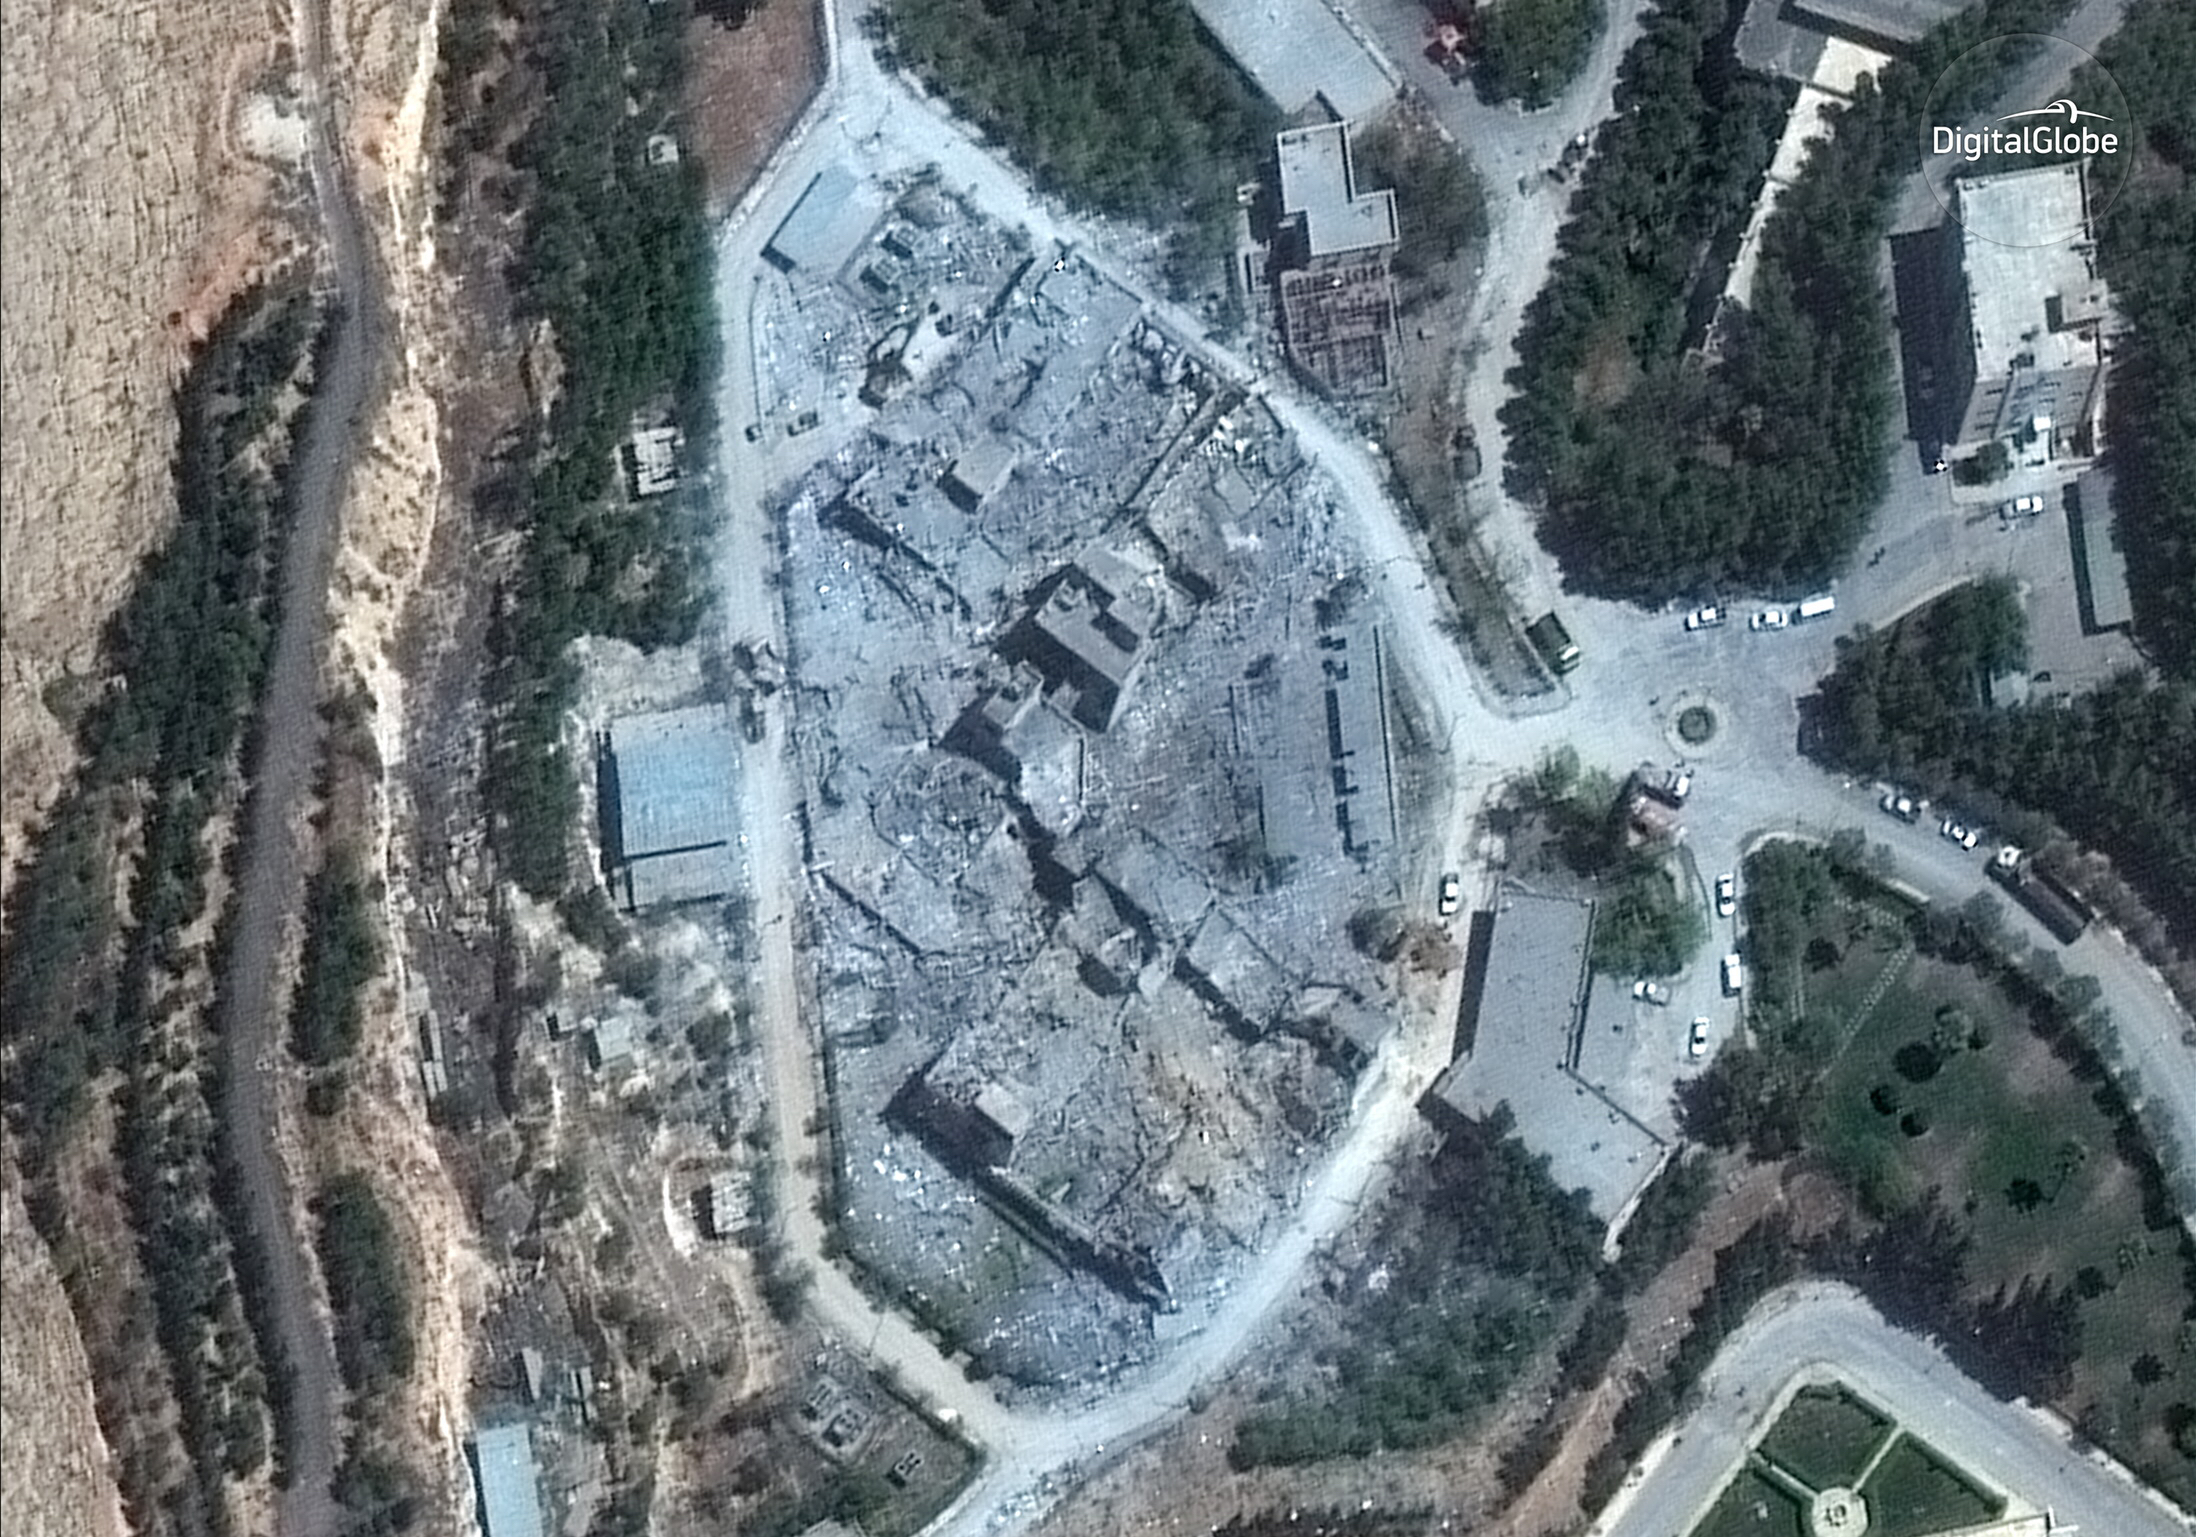 This satellite image, taken Monday morning, shows the Barzah Research and Development Center in Damascus after it was struck by coalition forces on Friday. (satellite image © 2018 DigitalGlobe, a Maxar company)